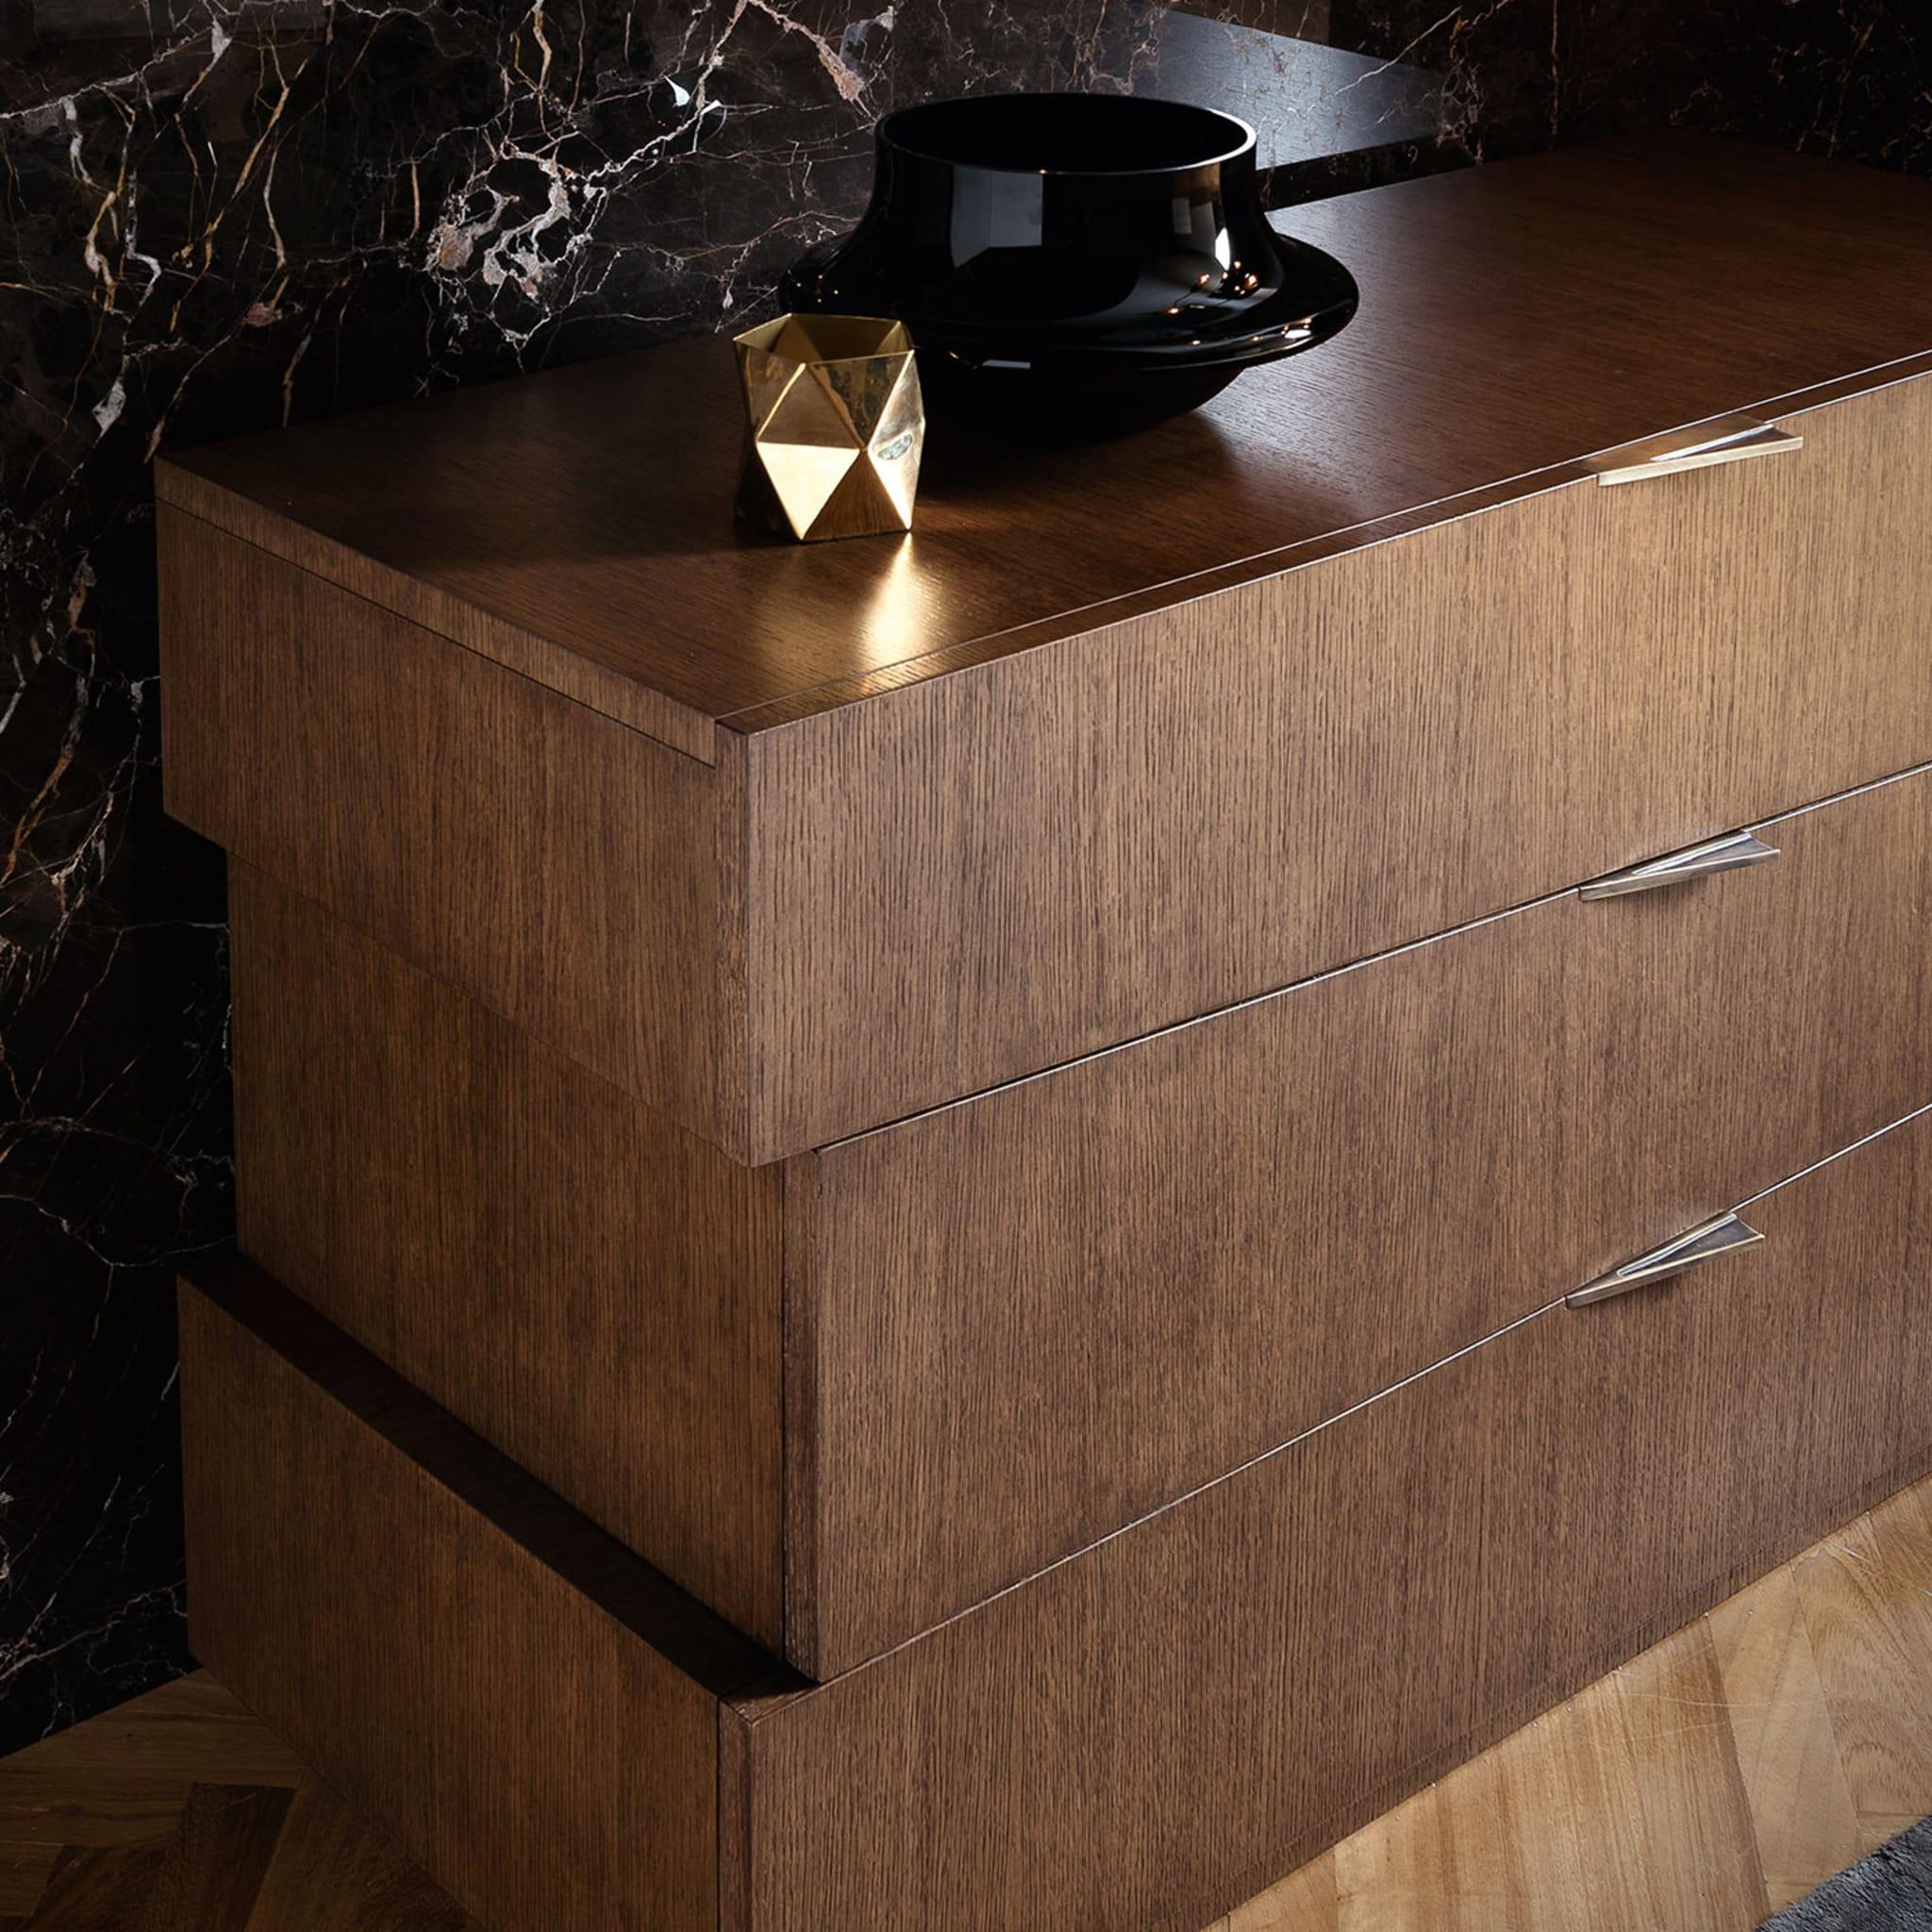 This sideboard is a one-of-a-kind piece of contemporary allure boasting an interplay of irregular shapes to reveal a striking, sculptural effect. The sideboard is composed of three soft-closing drawers of durmast wood enriched with metal handles